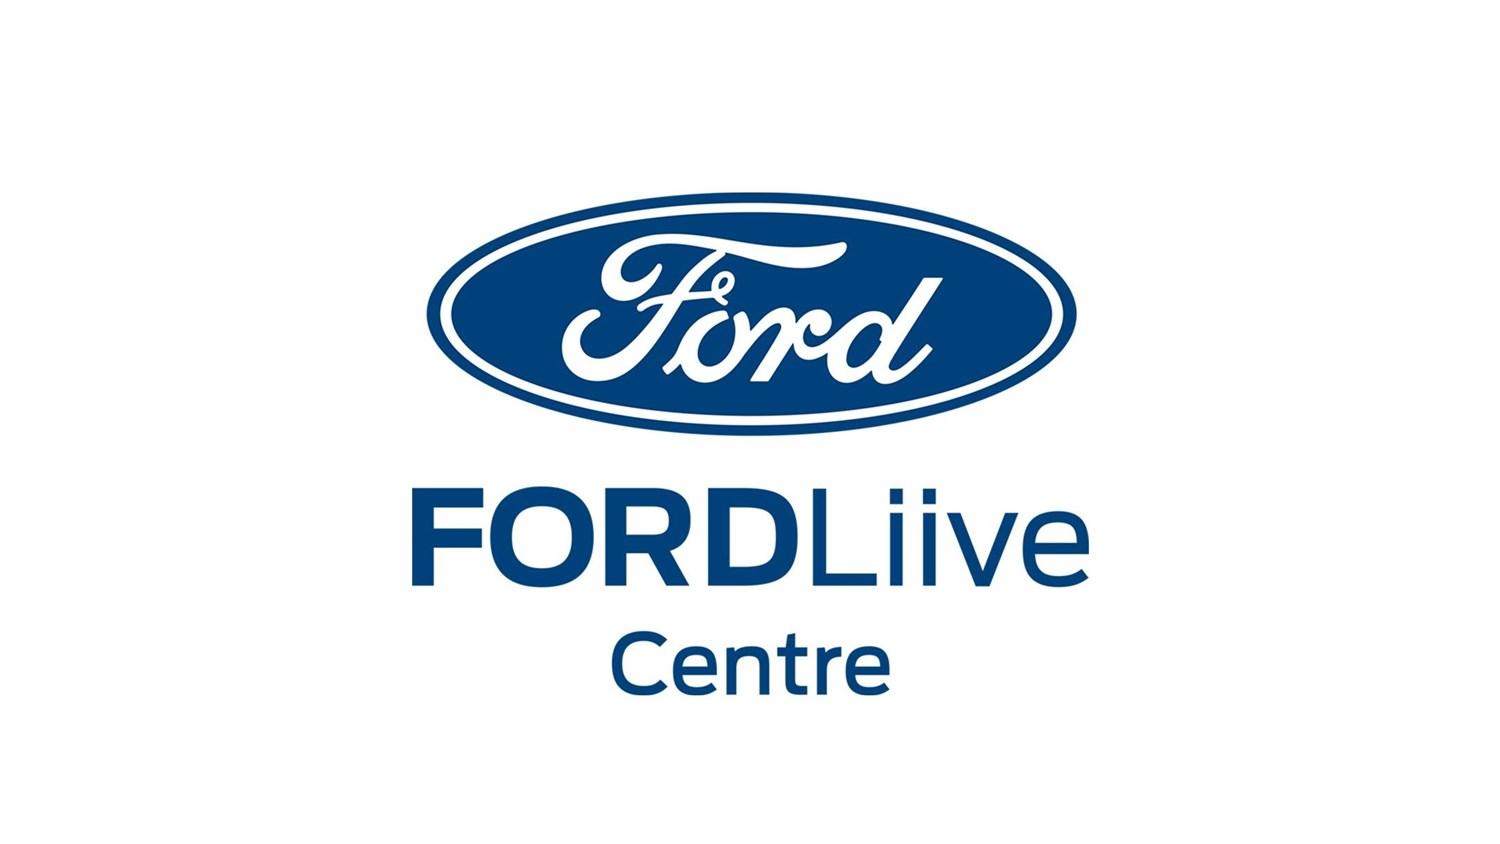 Ford Liive